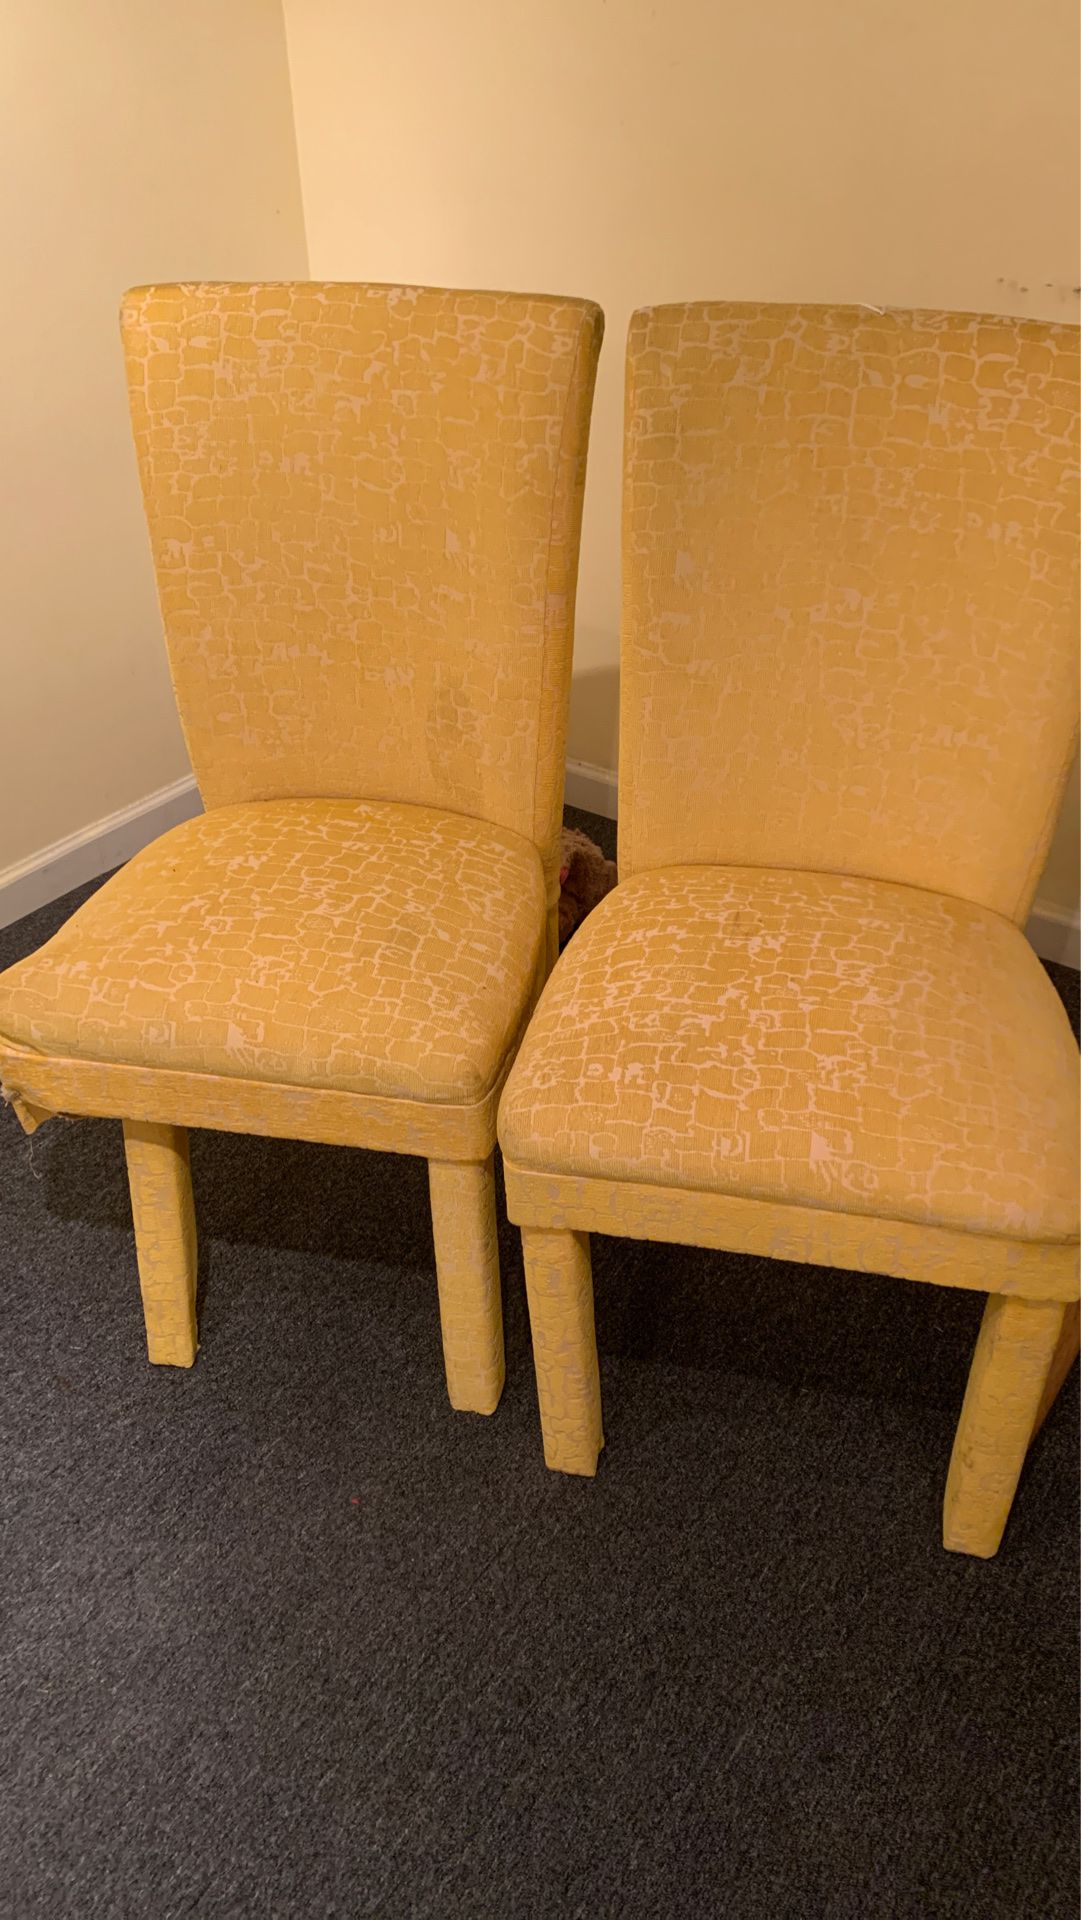 Yellow dining chairs